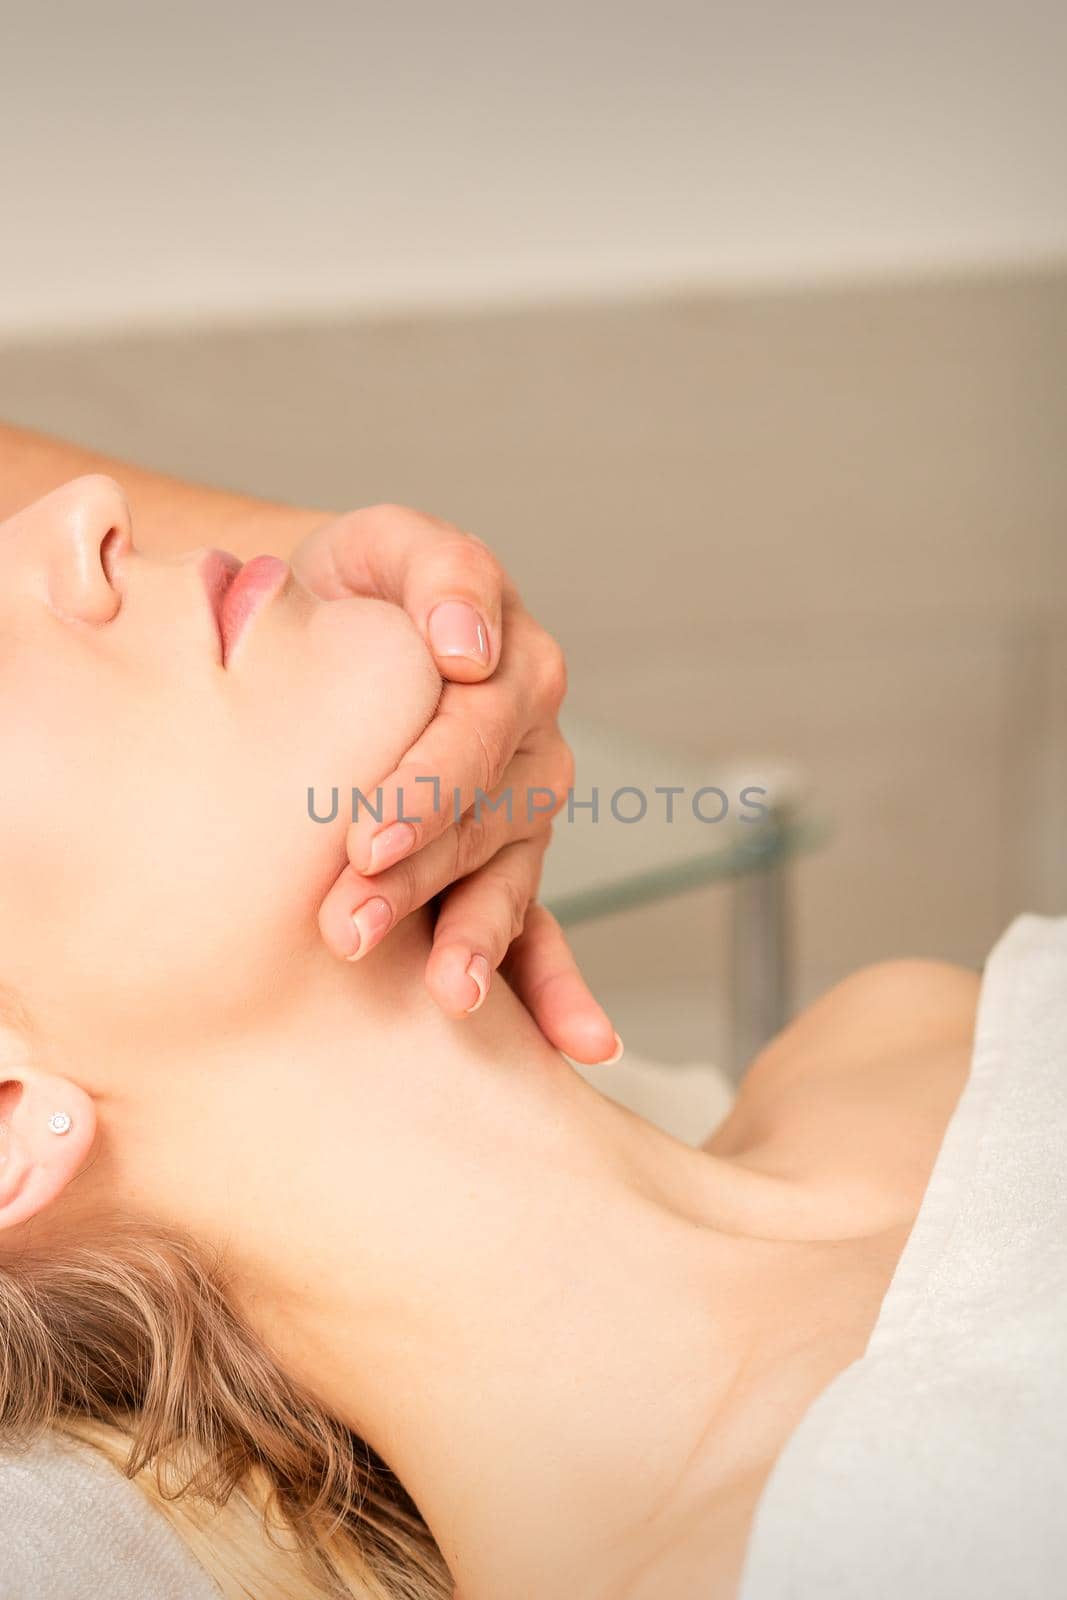 Cosmetologist hands doing facial massage on forehead and chin of young female at spa salon